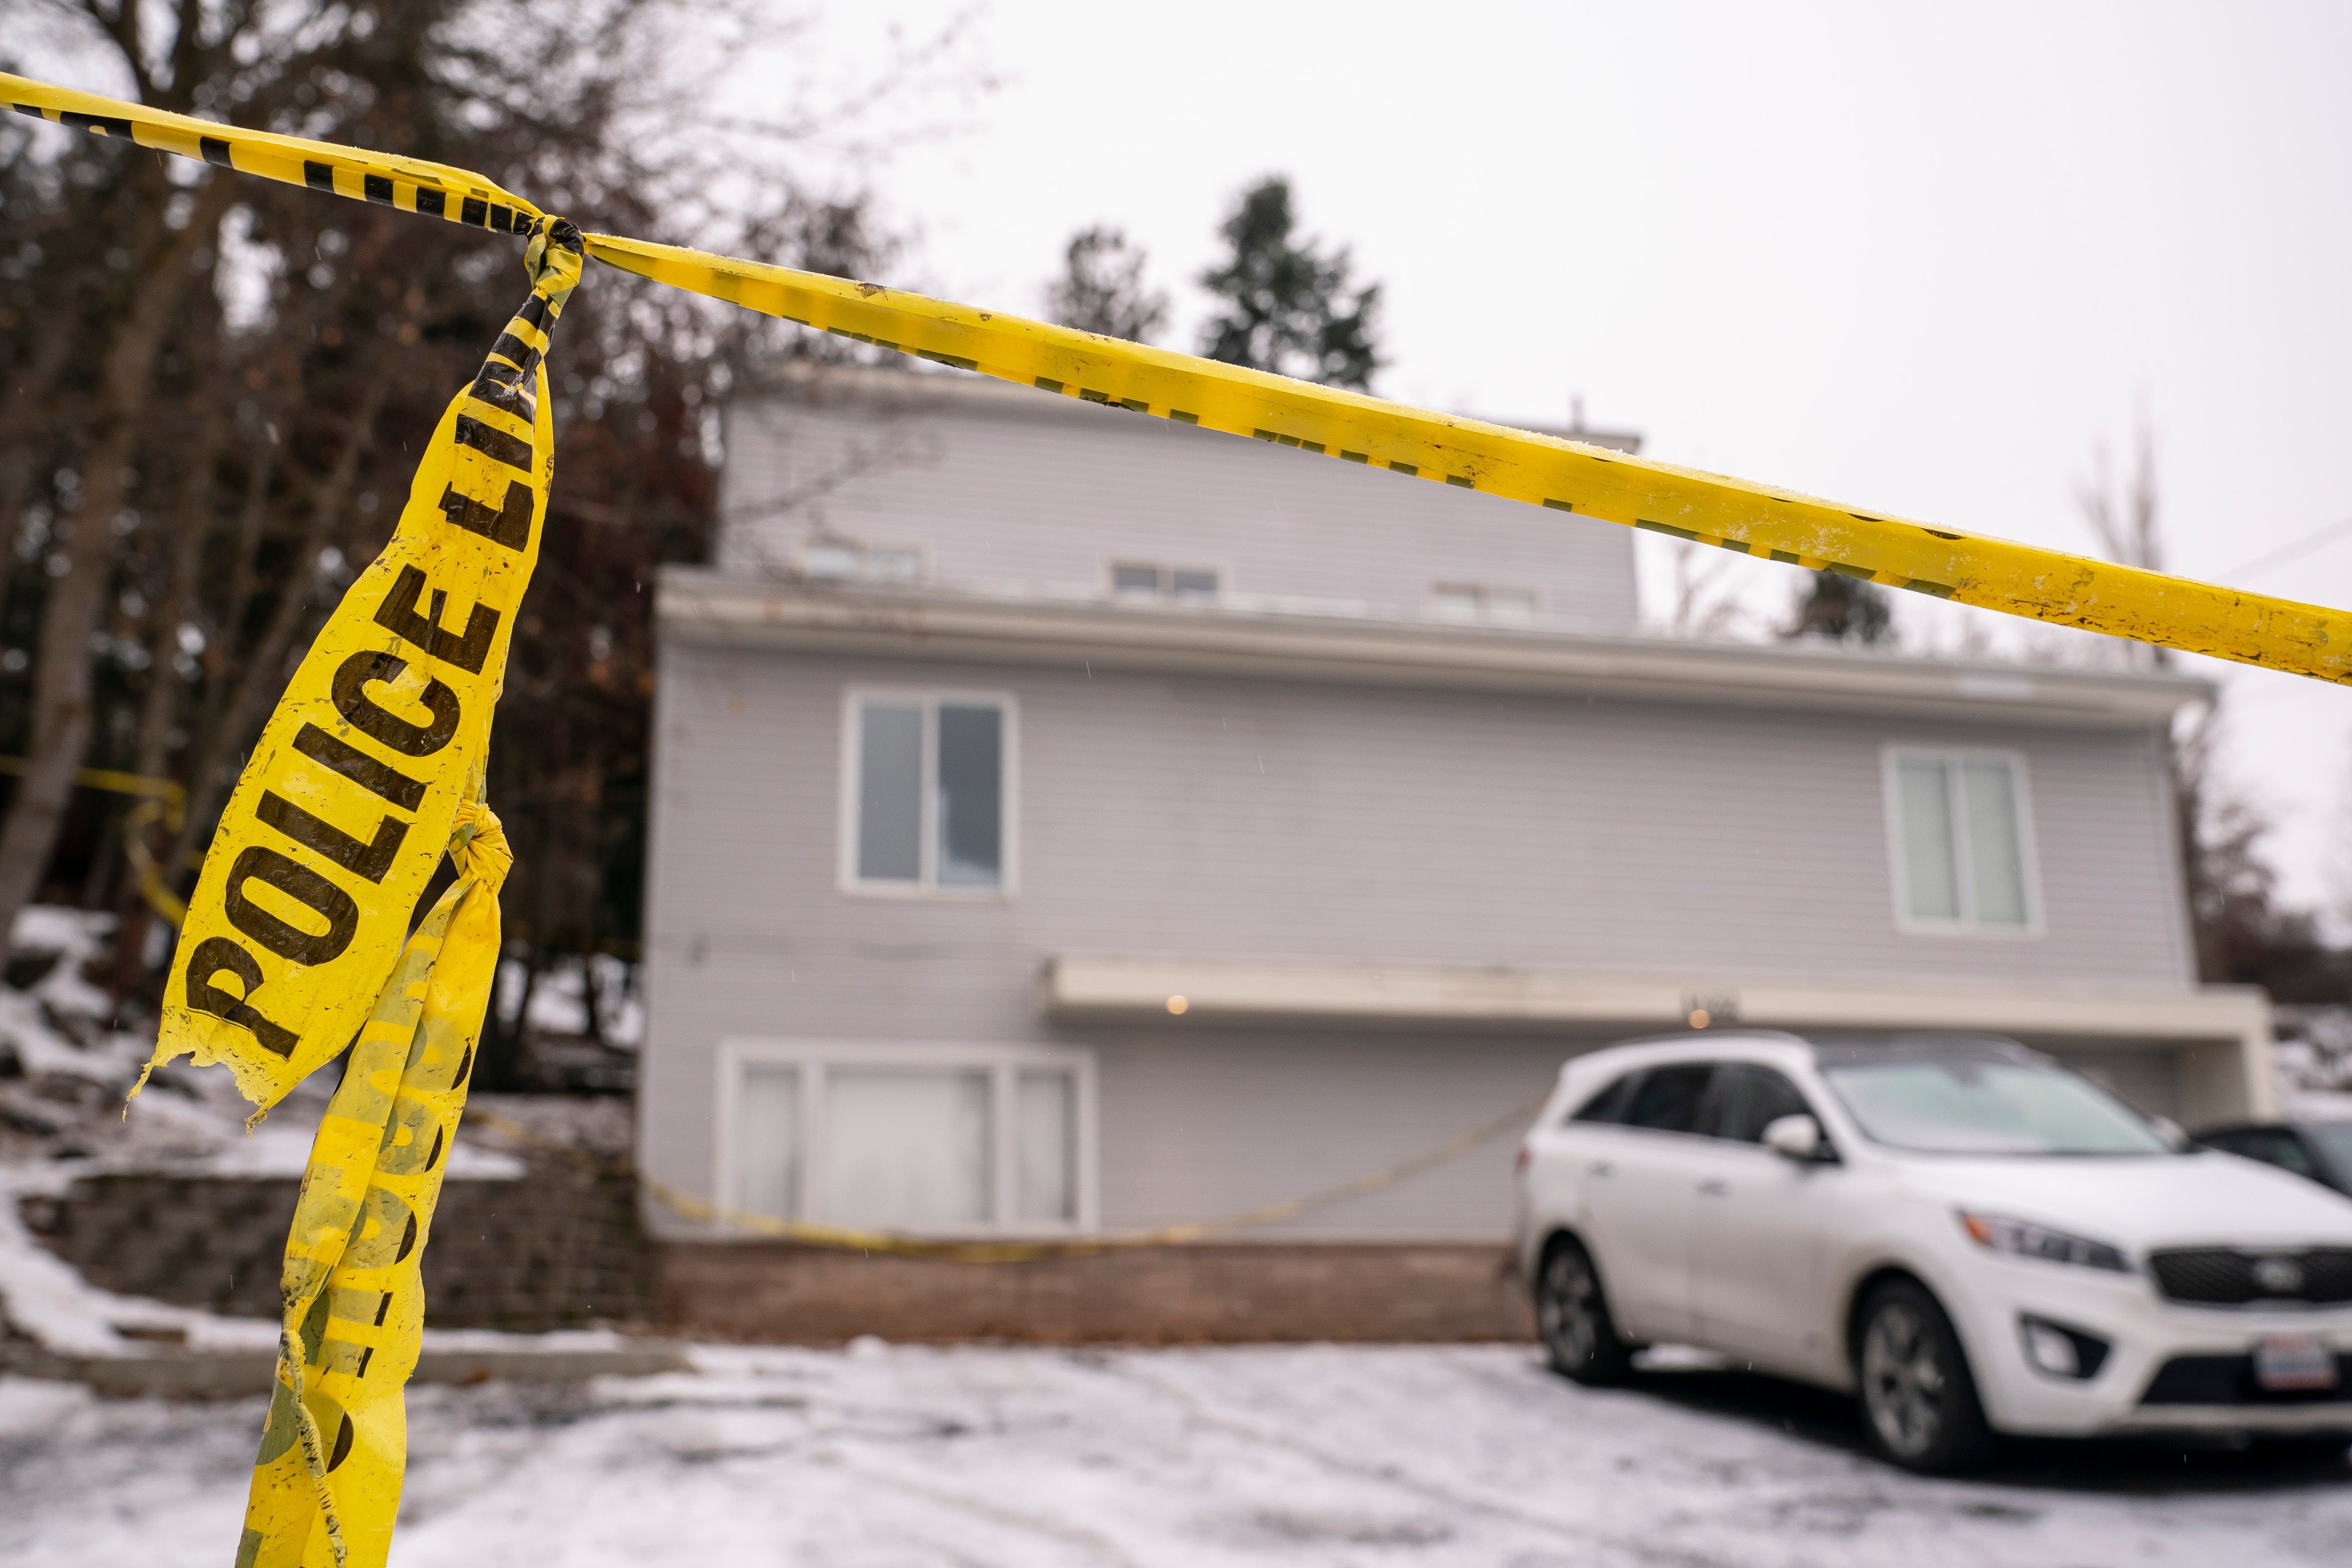 The house where the four victims were murdered is set to be torn down